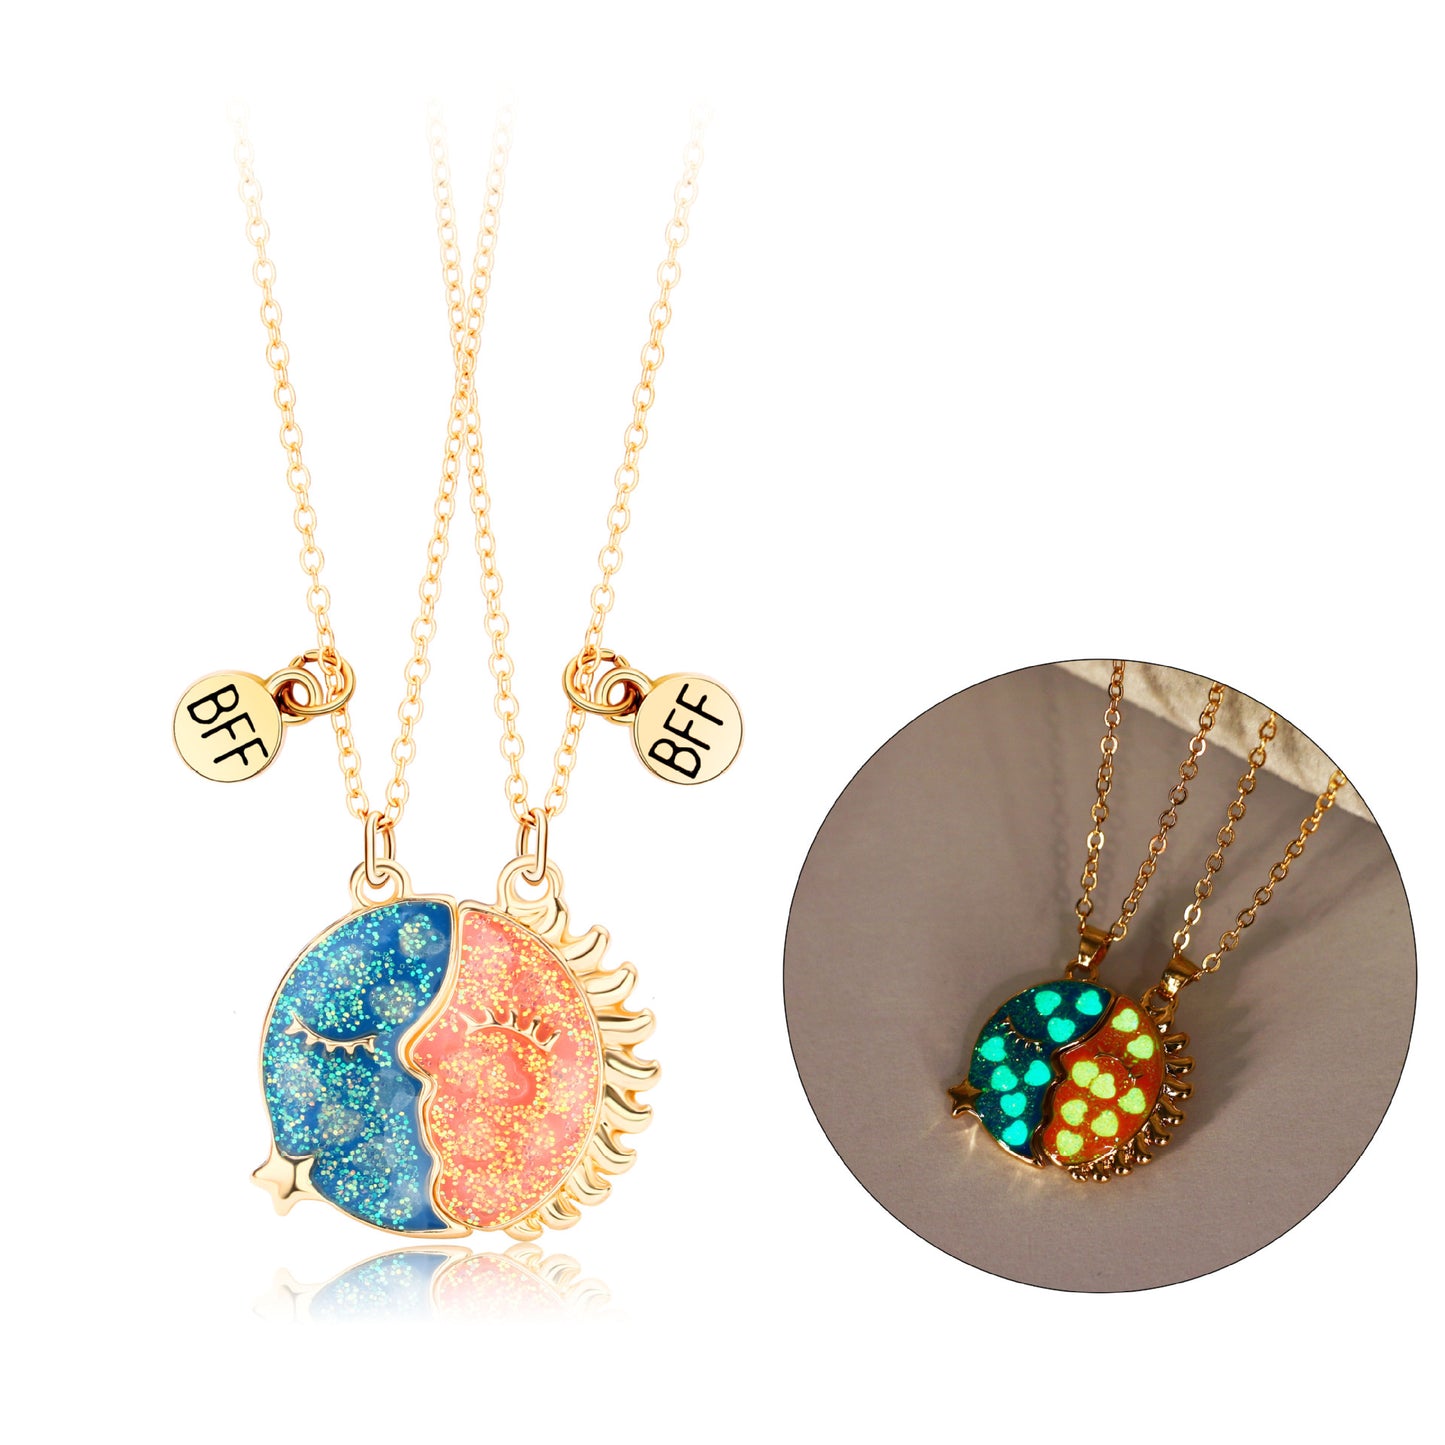 Sun and Moon Night Glow Friendship Necklaces Gift